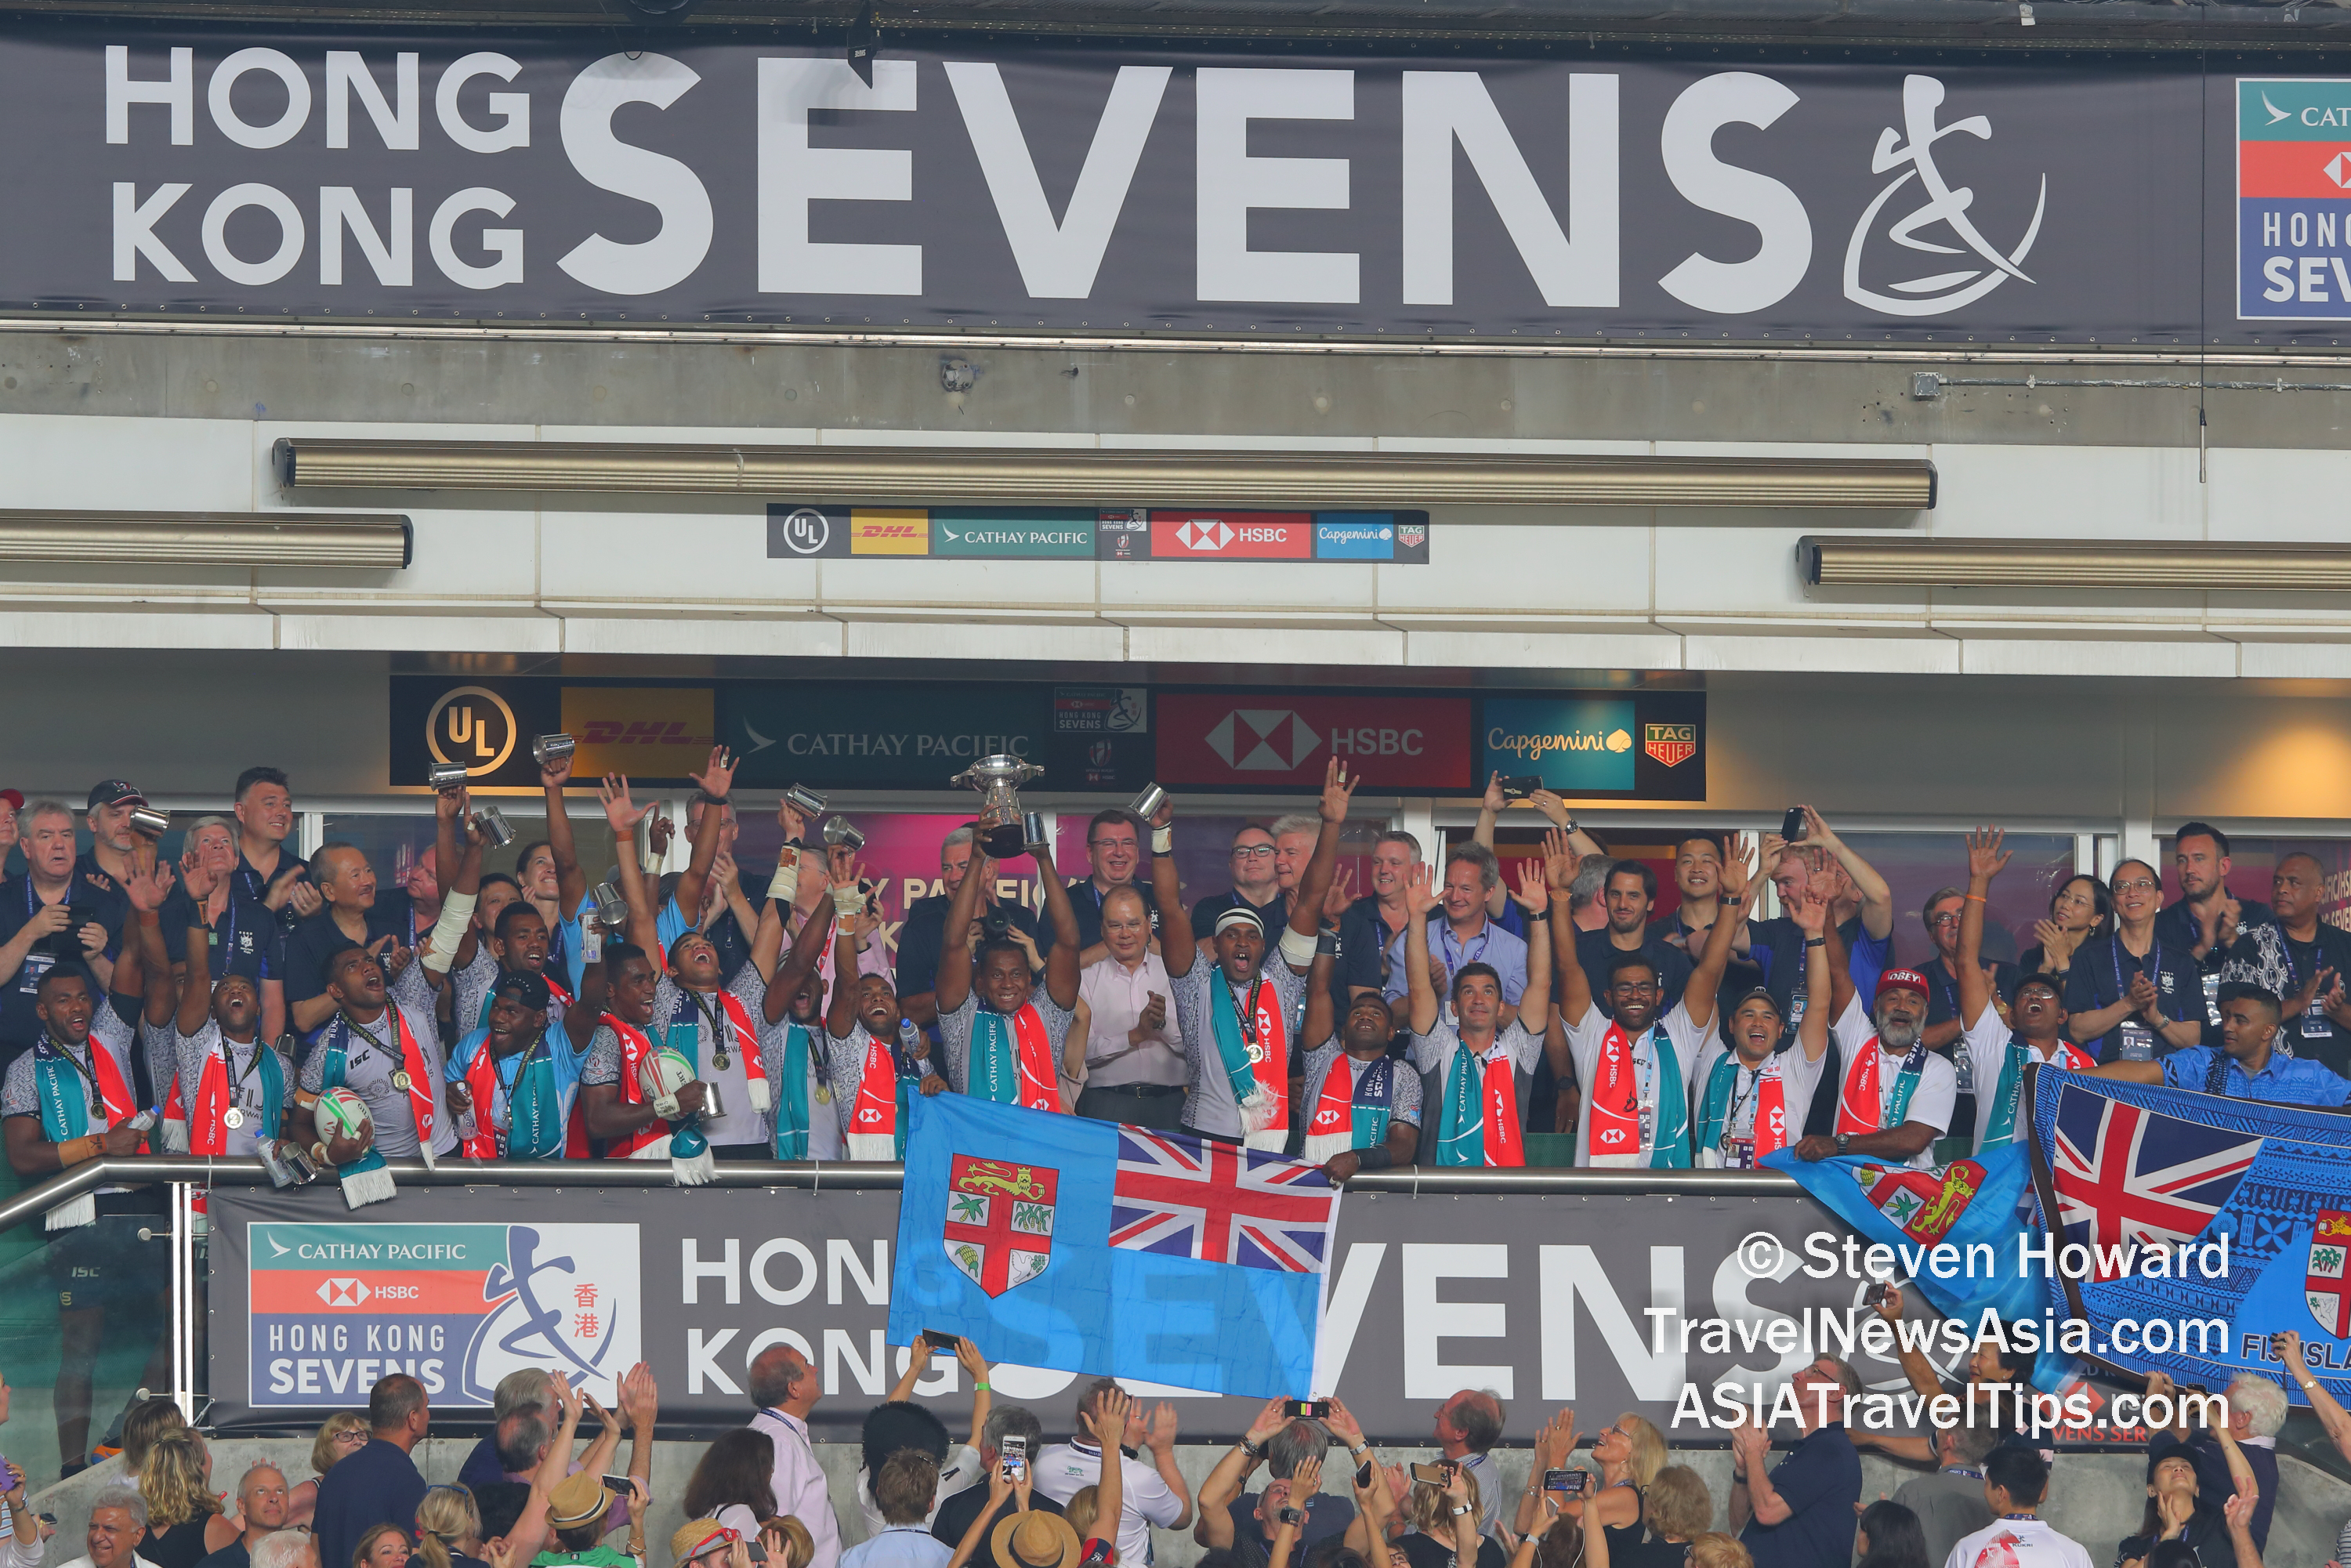 Fiji made history on Sunday by winning their fifth consecutive Hong Kong Sevens title with a 21-7 victory over France in the Cup Final. Picture by Steven Howard of TravelNewsAsia.com Click to enlarge.